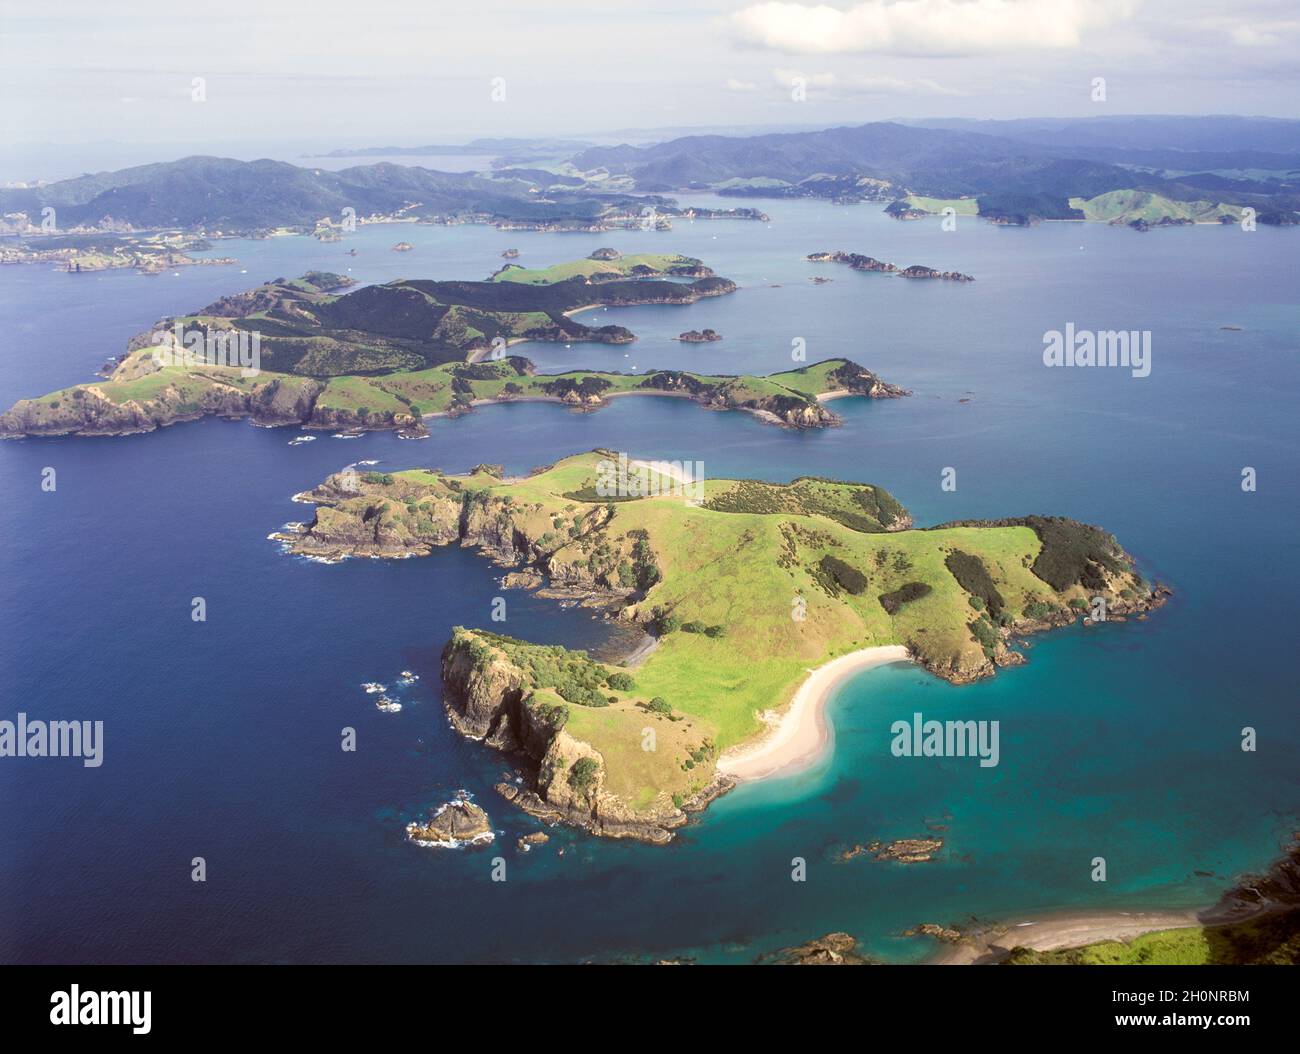 The Bay of Islands on the north island of New Zealand. Stock Photo